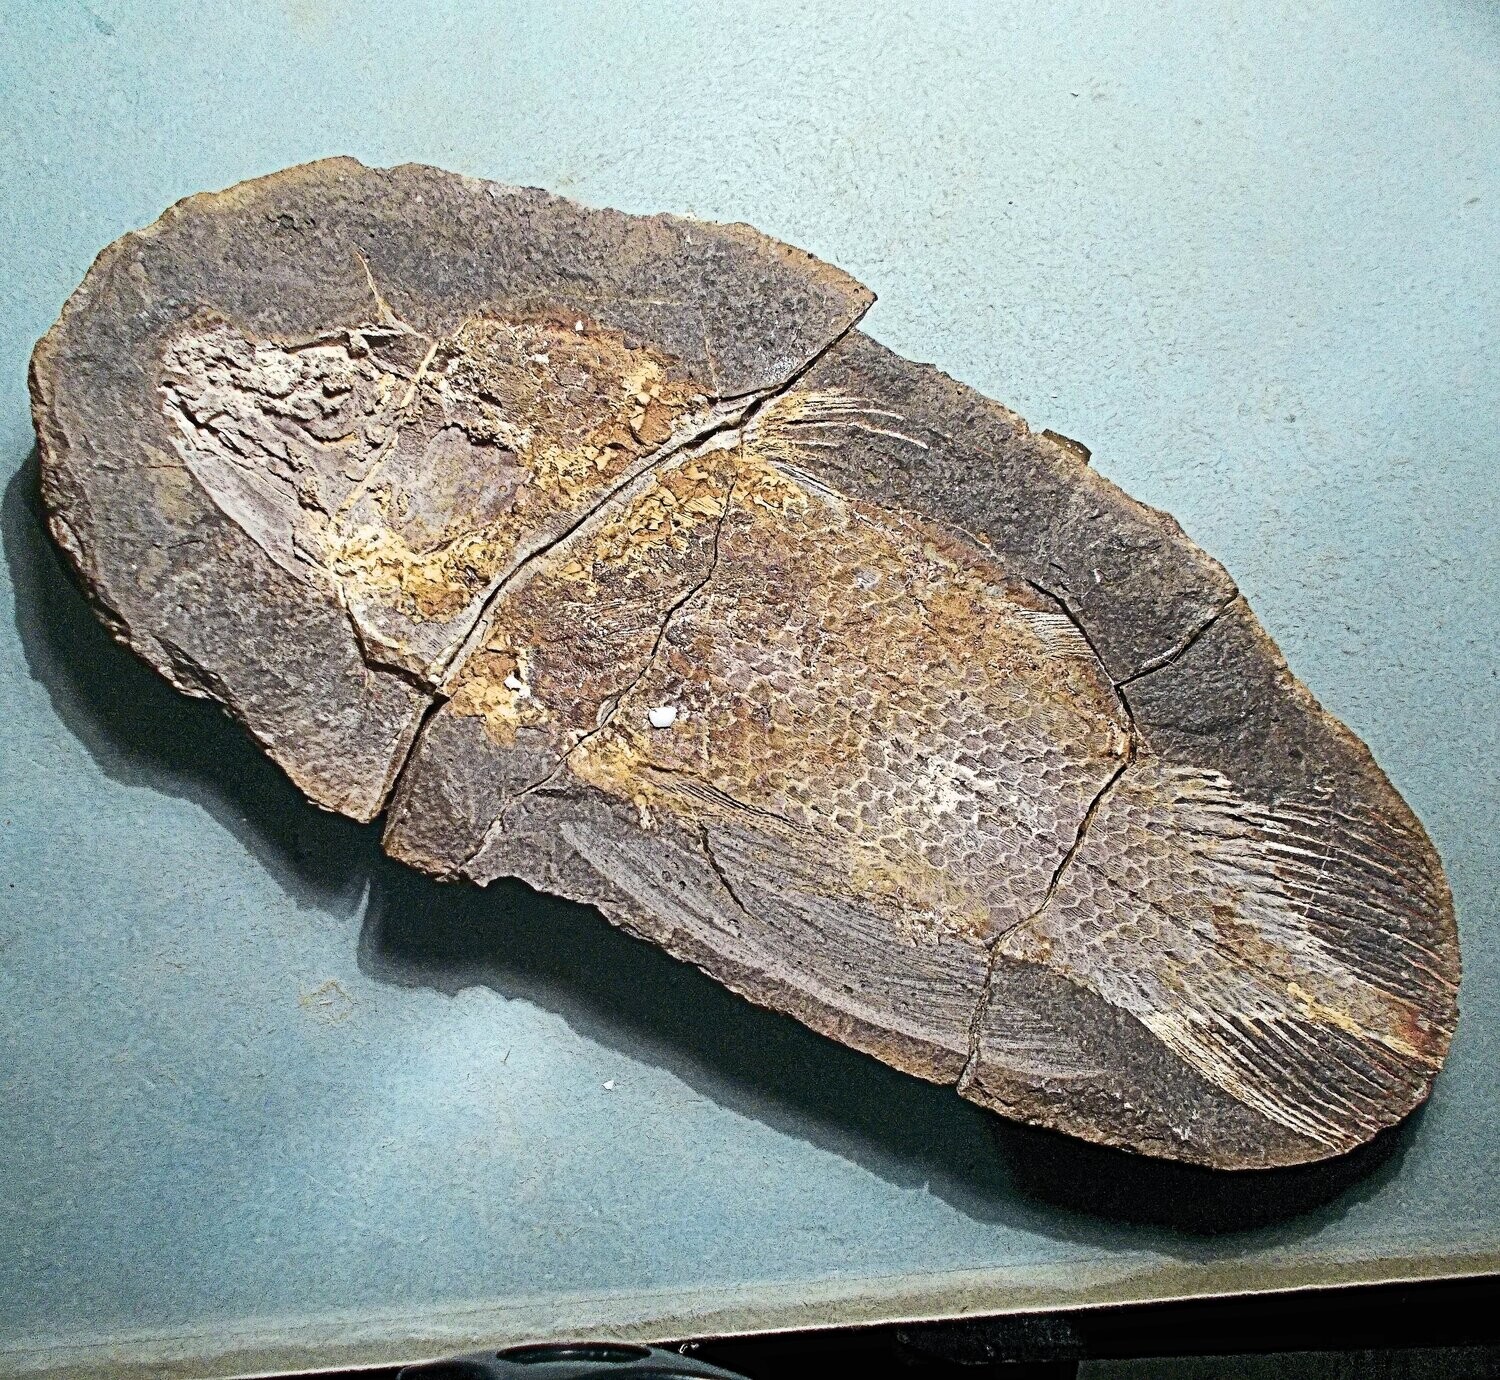 Beautiful complete 17cm Coelocanth Whitea woodwardi from Triassic of Madagascar